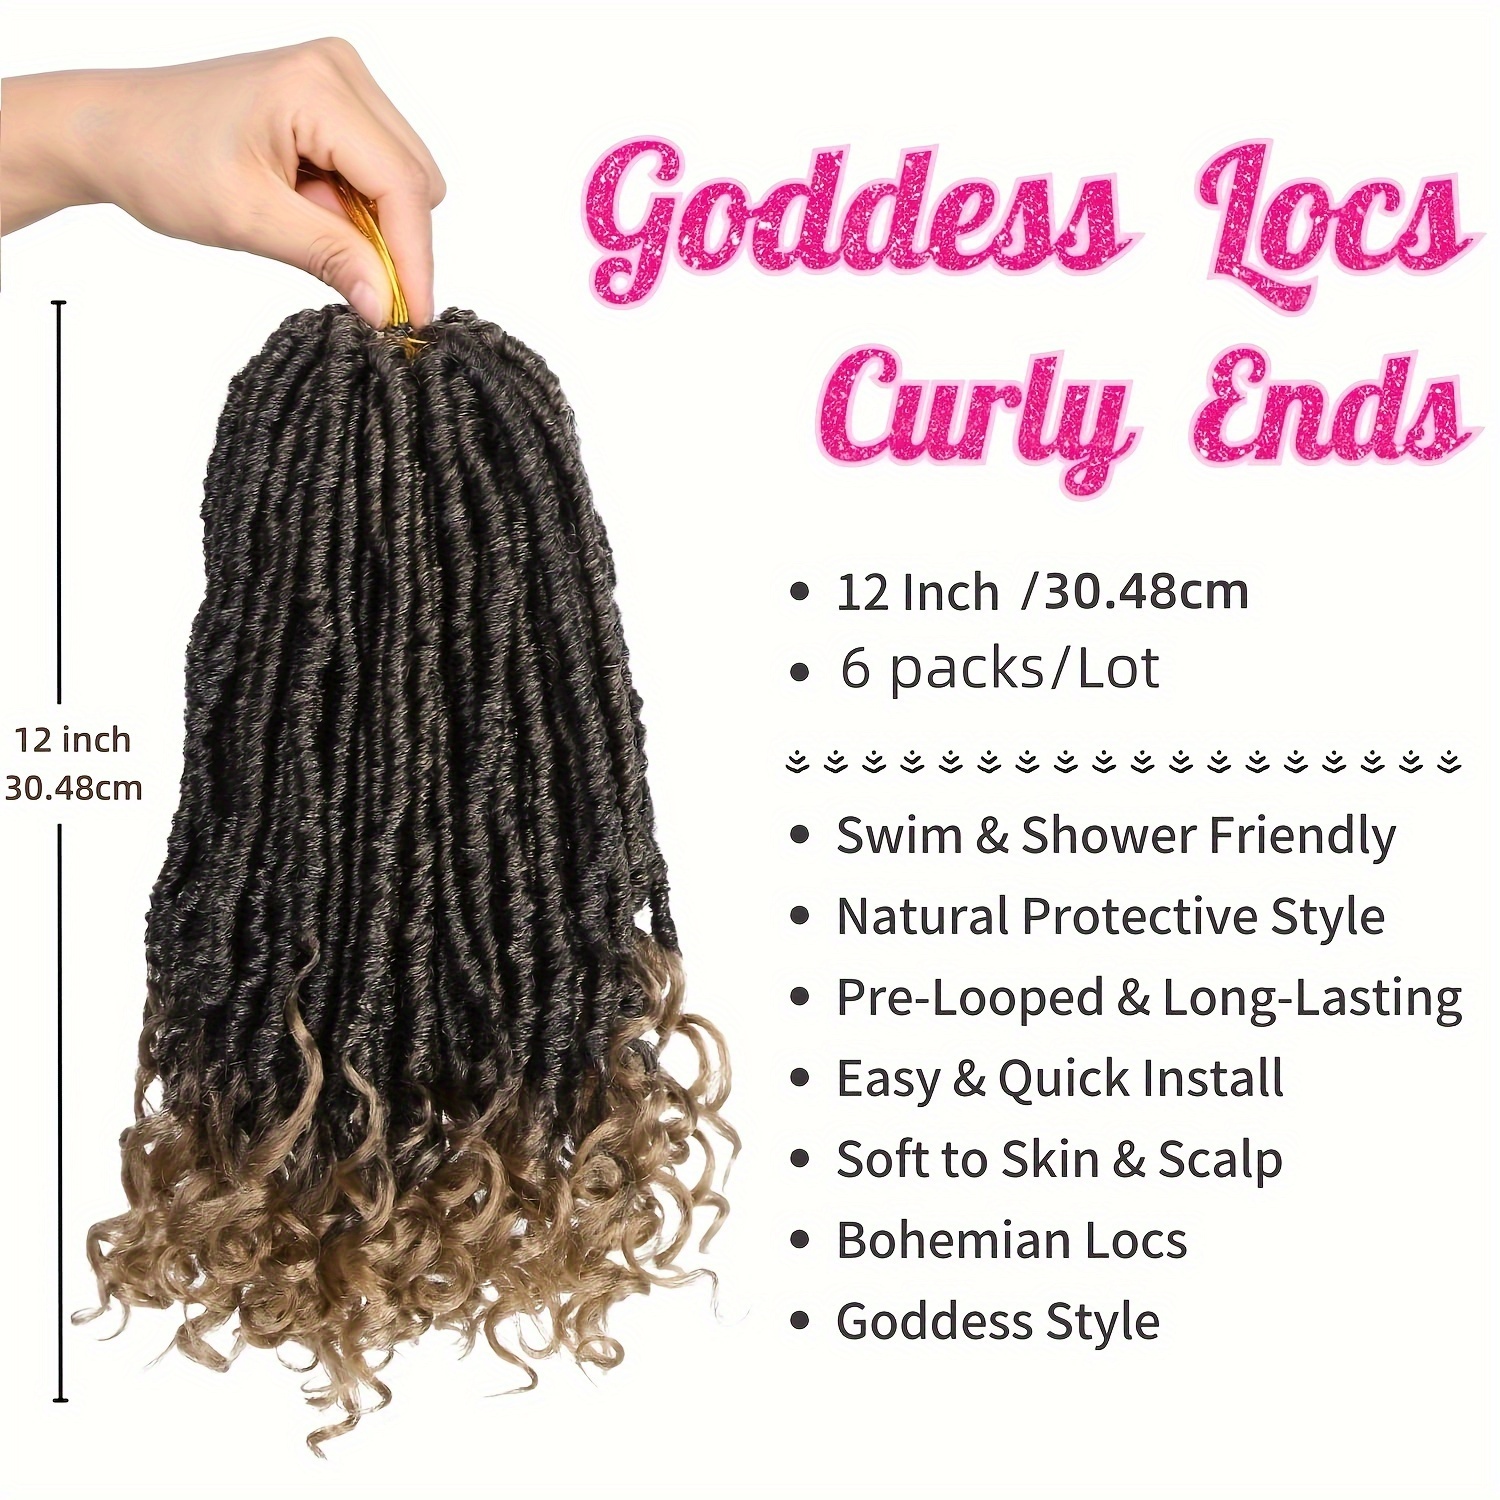 Goddess Locs Crochet Hair Curly Ends Ombre Blonde Pre looped